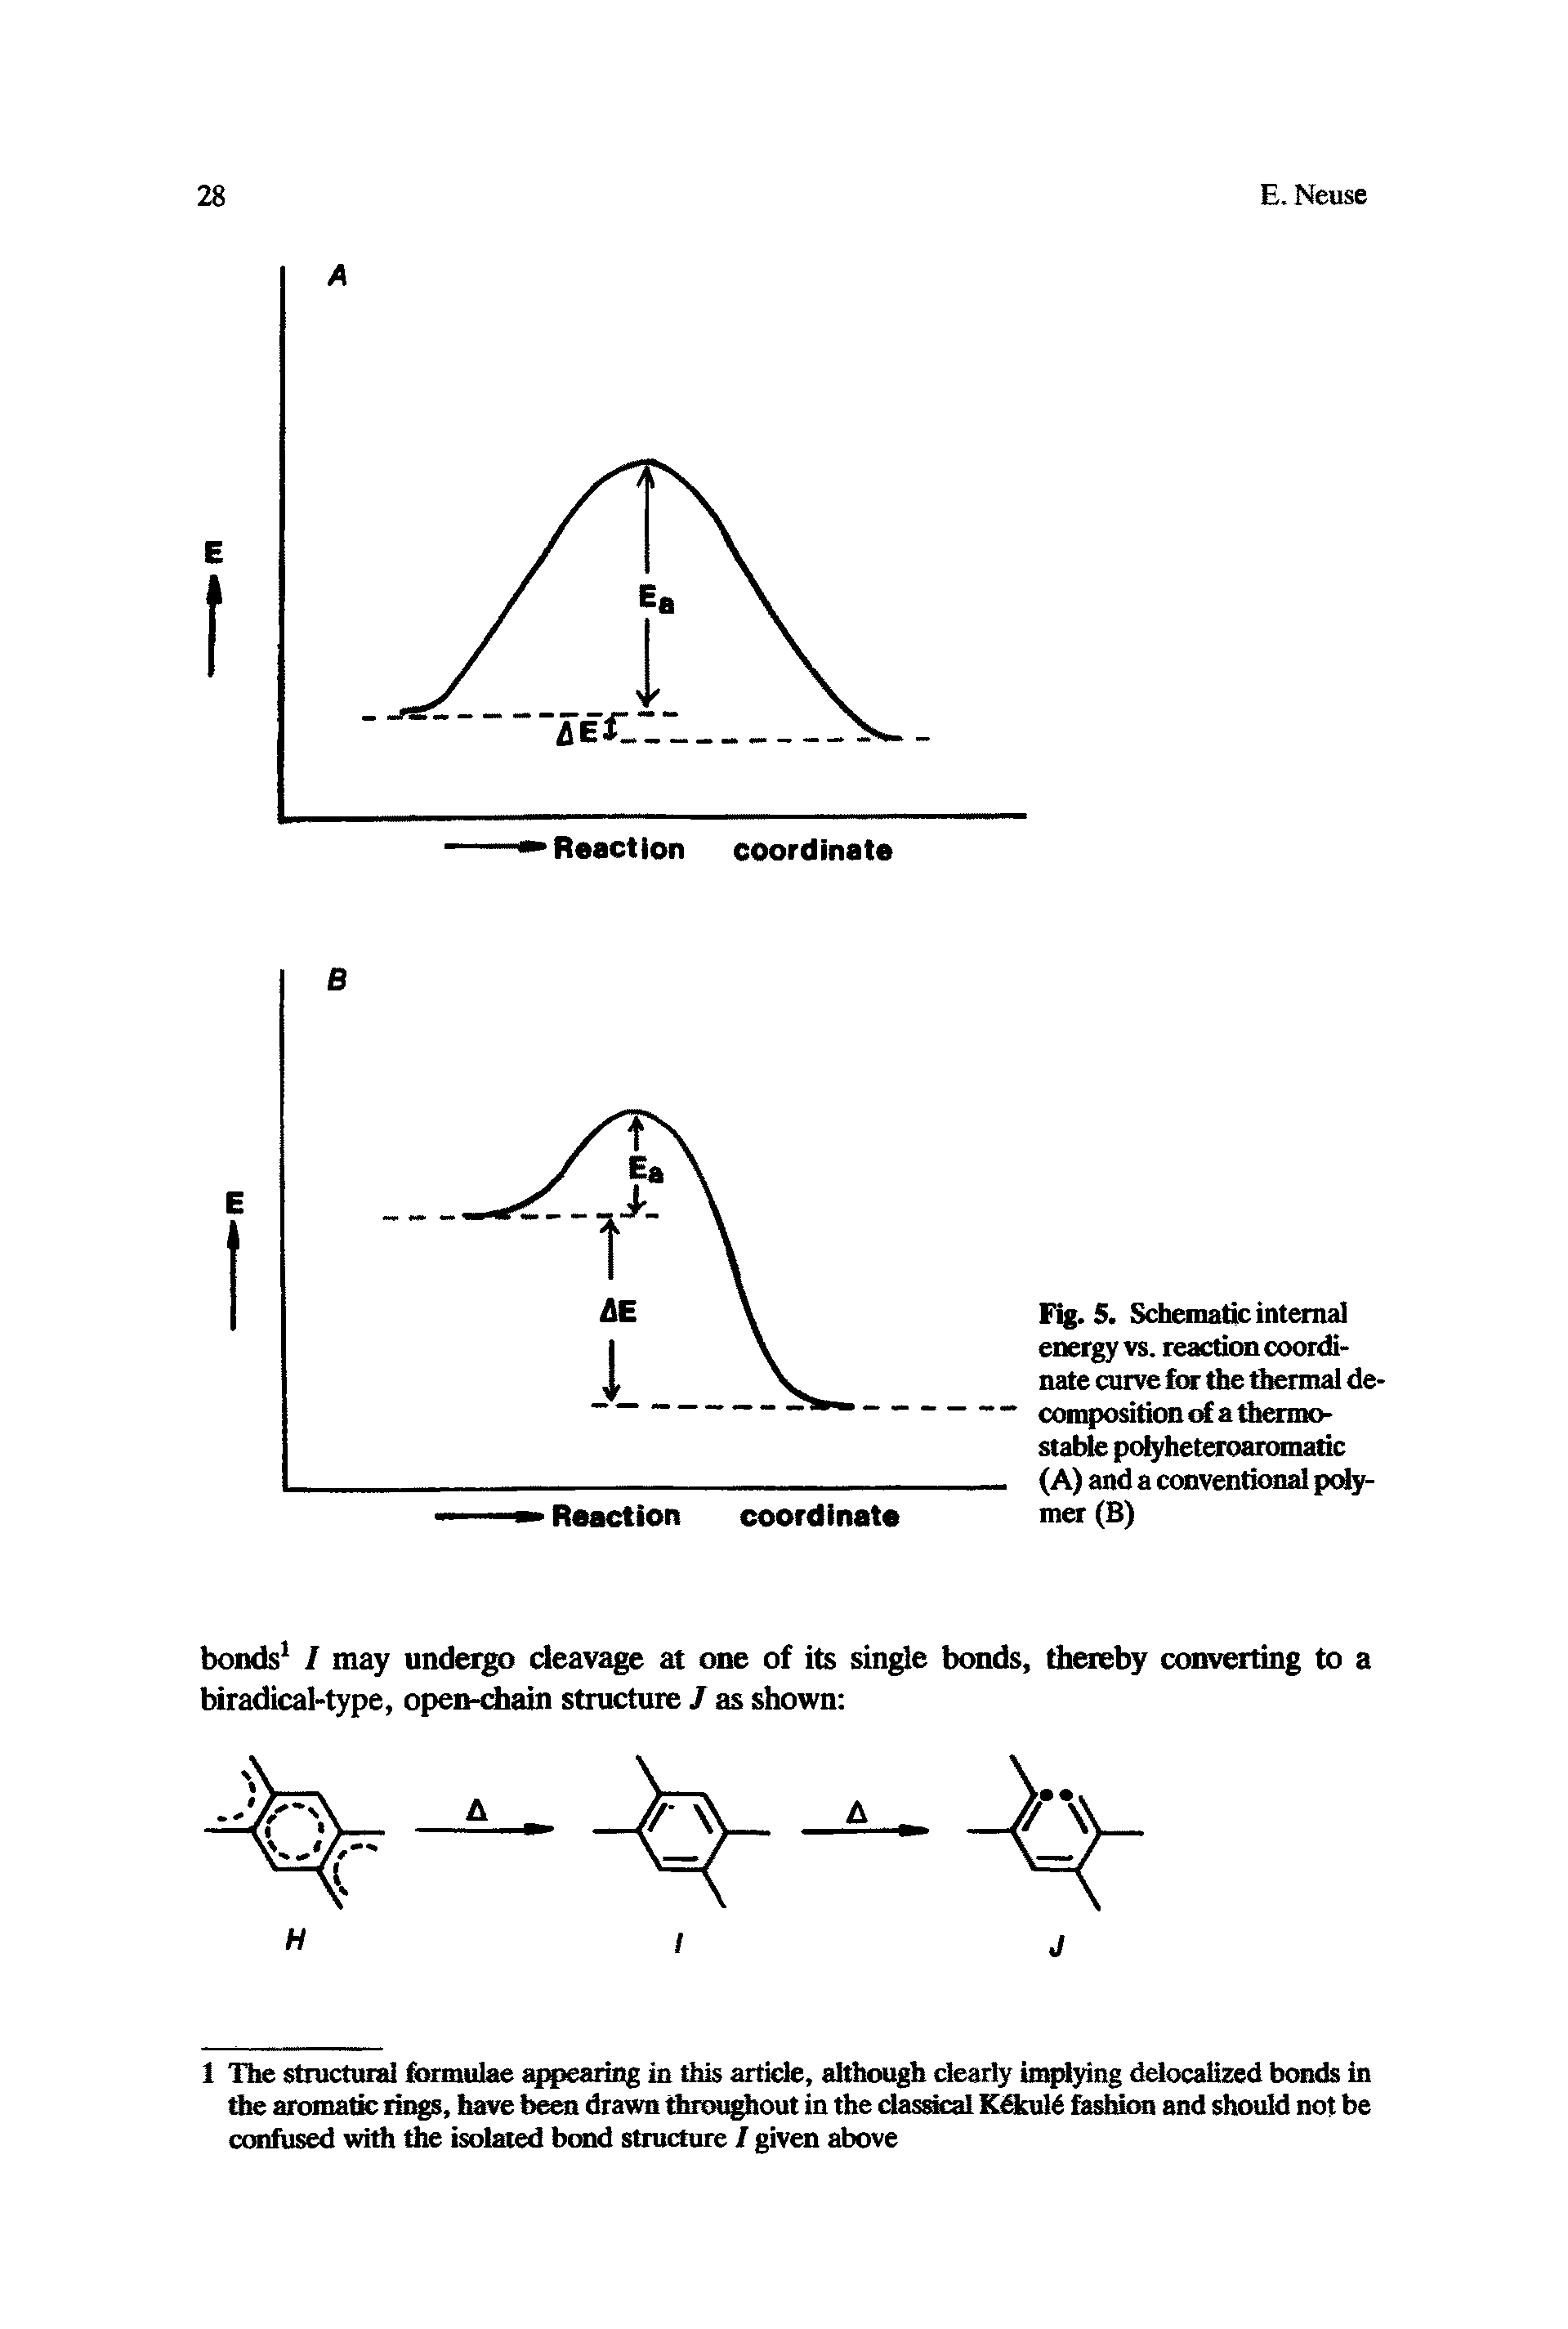 Fig. 5. Schematic internal energy vs. reaction coordinate curve few the thermal decomposition a thermo-stable pofyheteroaromatic (A) and a conventional polymer (B)...